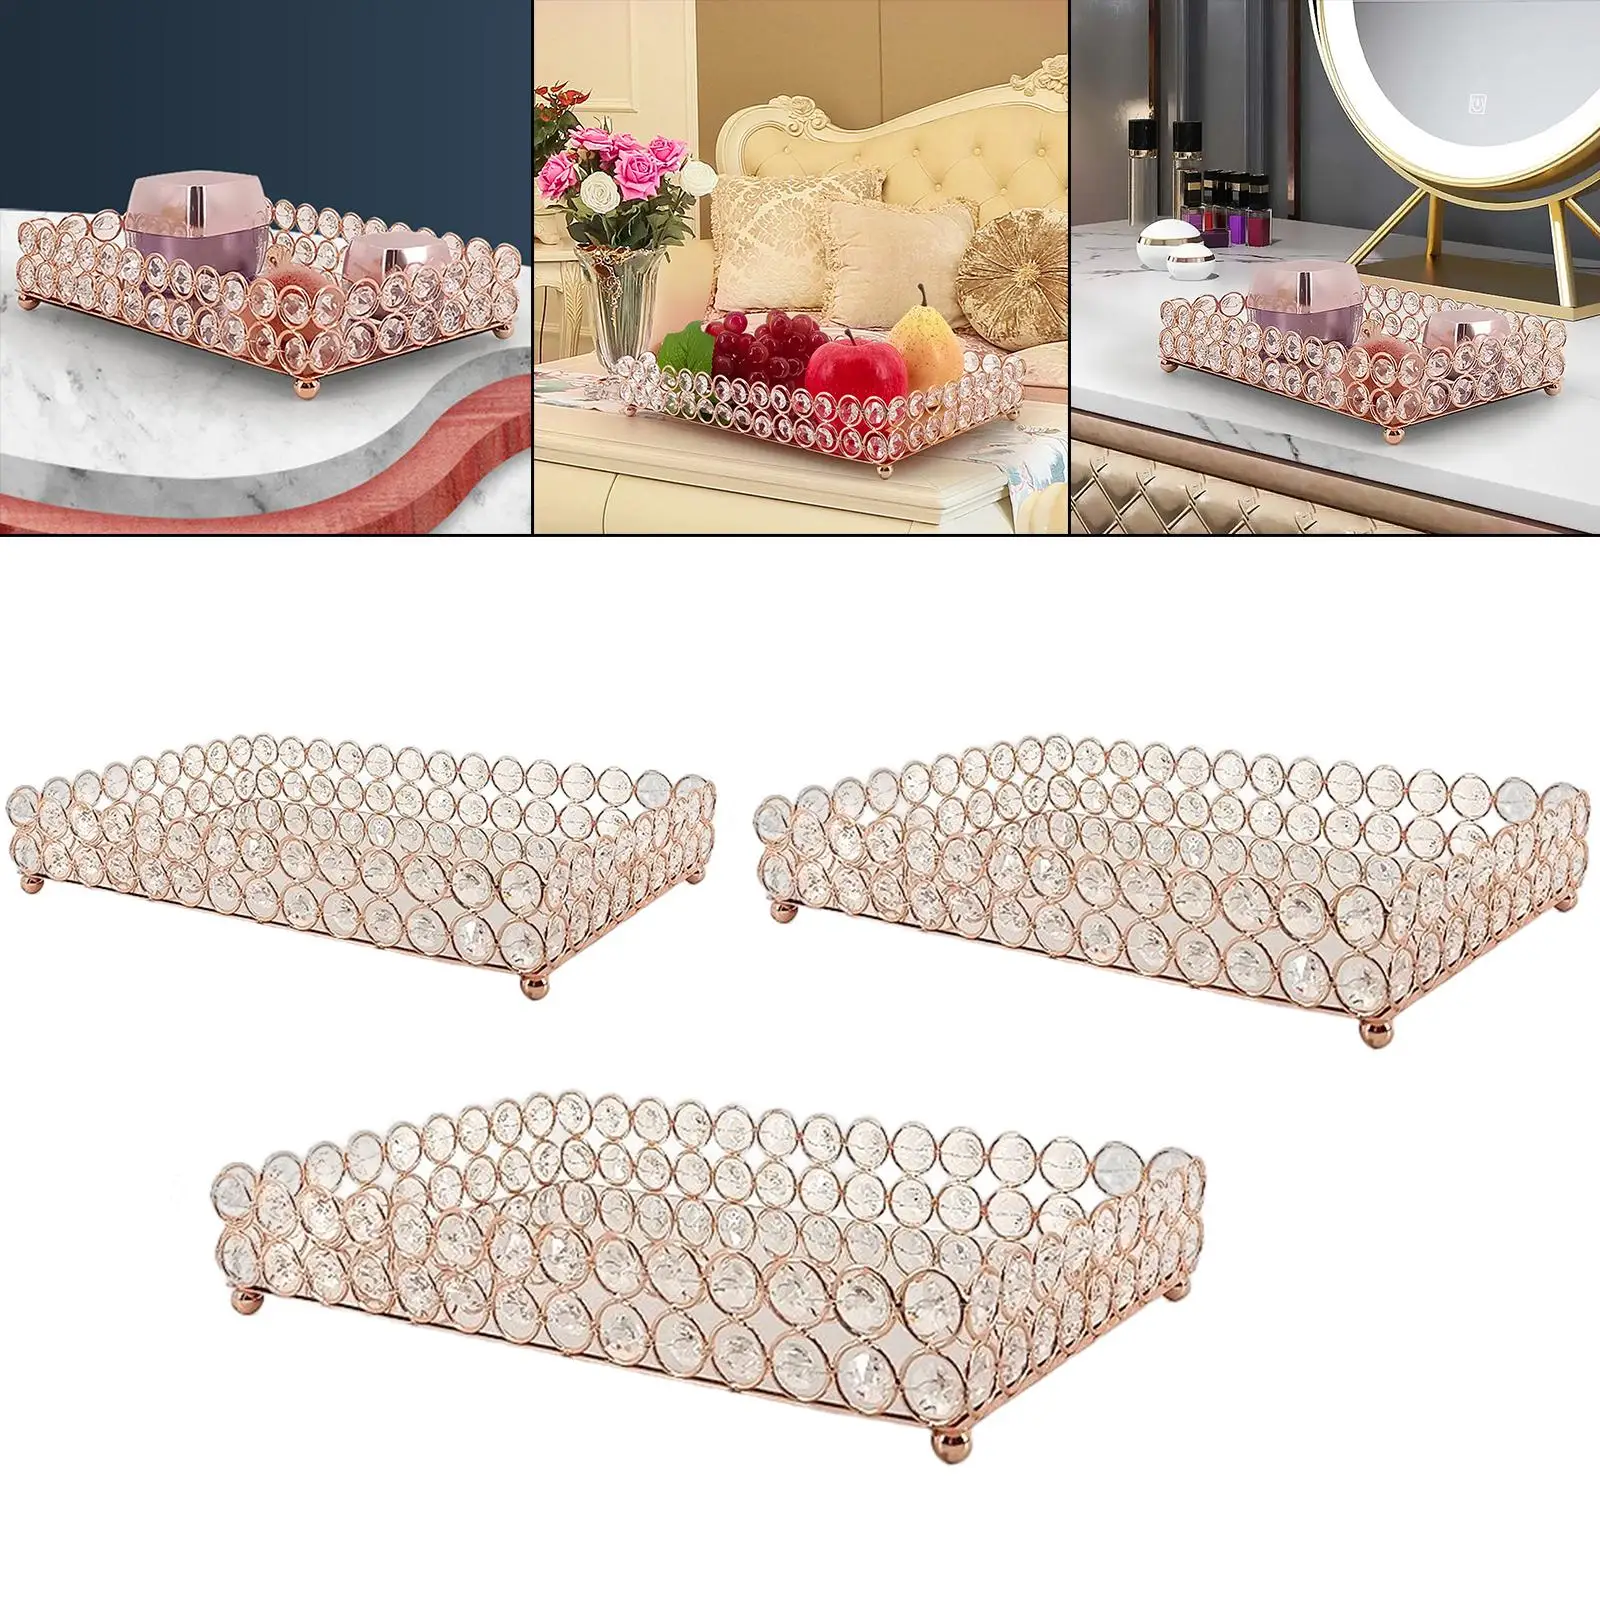 Decorative Mirrored Fruit Tray Panel Retro Crystal Organizer Vanity Tray Display Panel for Wedding Office Dresser Wine Candles